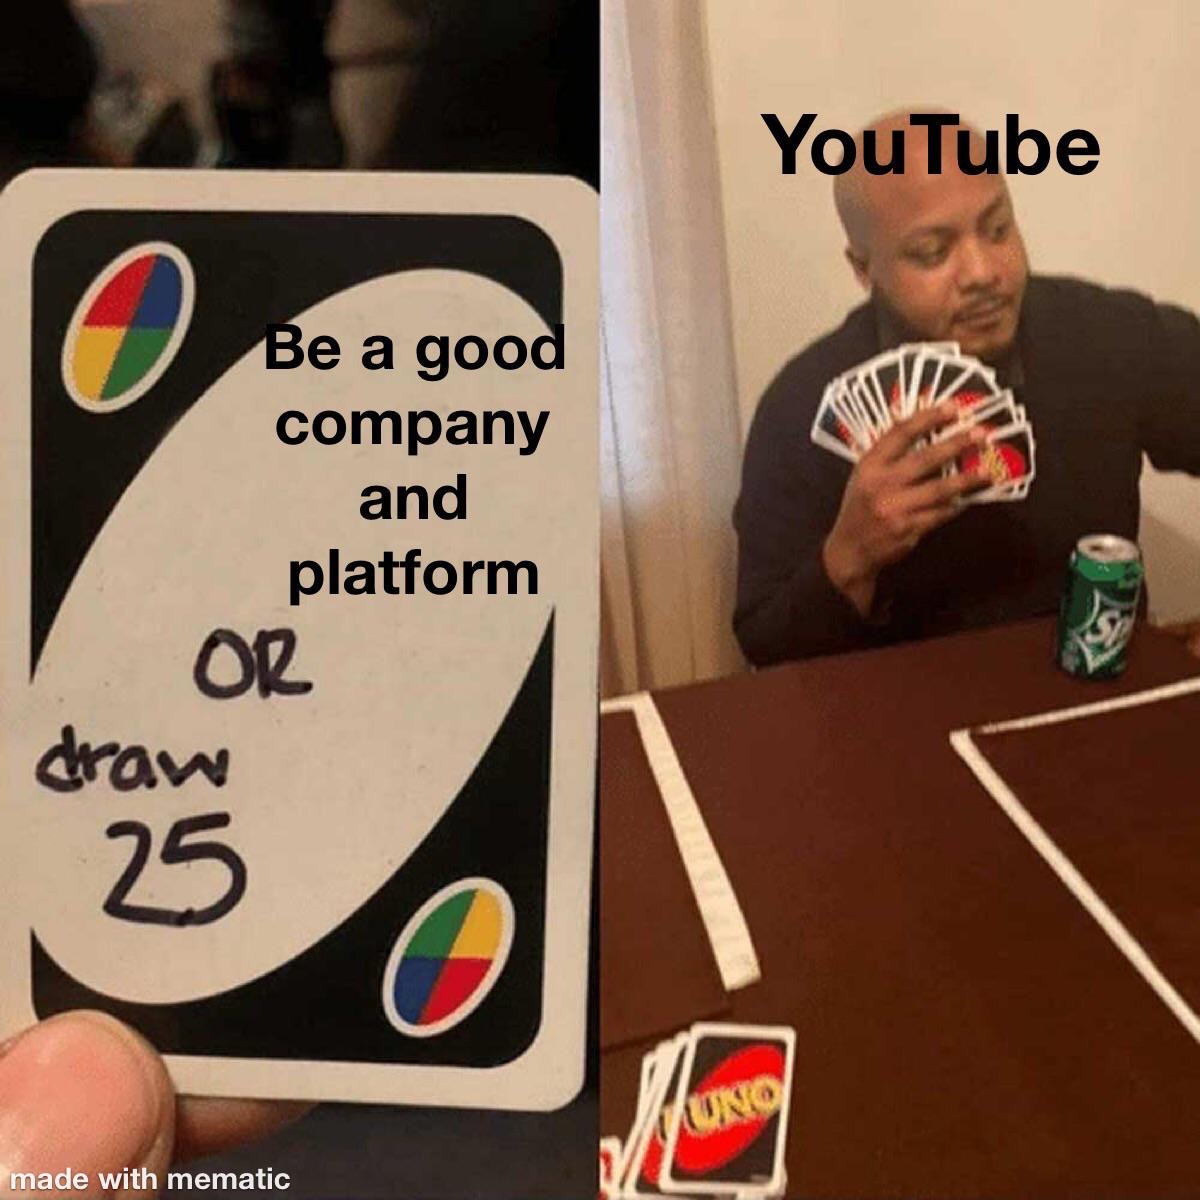 li wenliang meme - YouTube O Be a good company and platform Or draw 25 Uno made with mematic